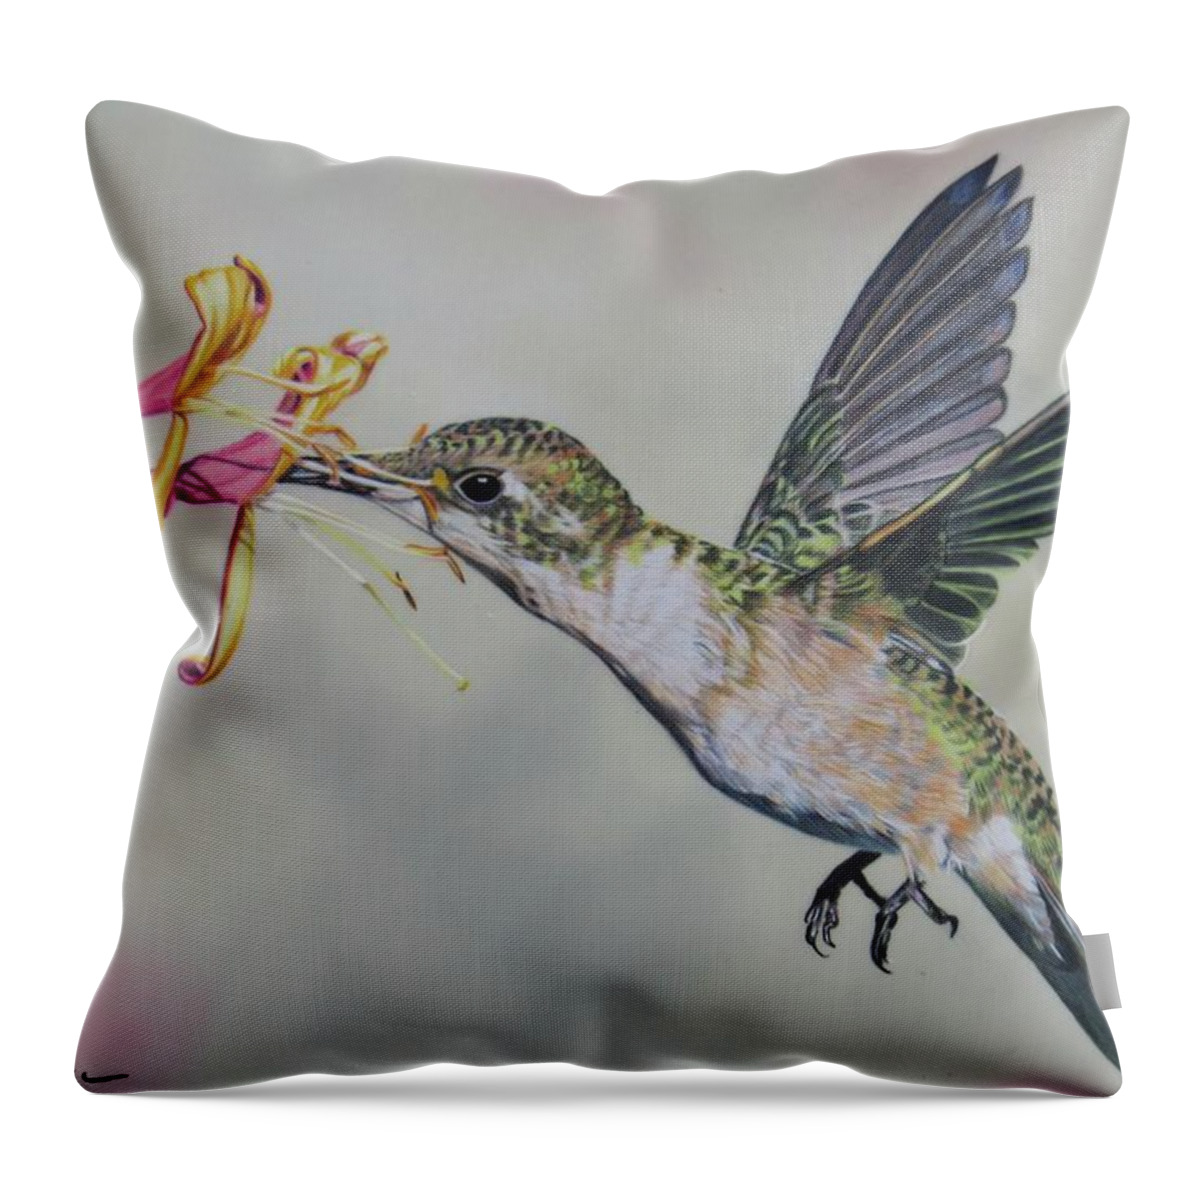 Hummingbird Throw Pillow featuring the drawing Humming Along by Kelly Speros